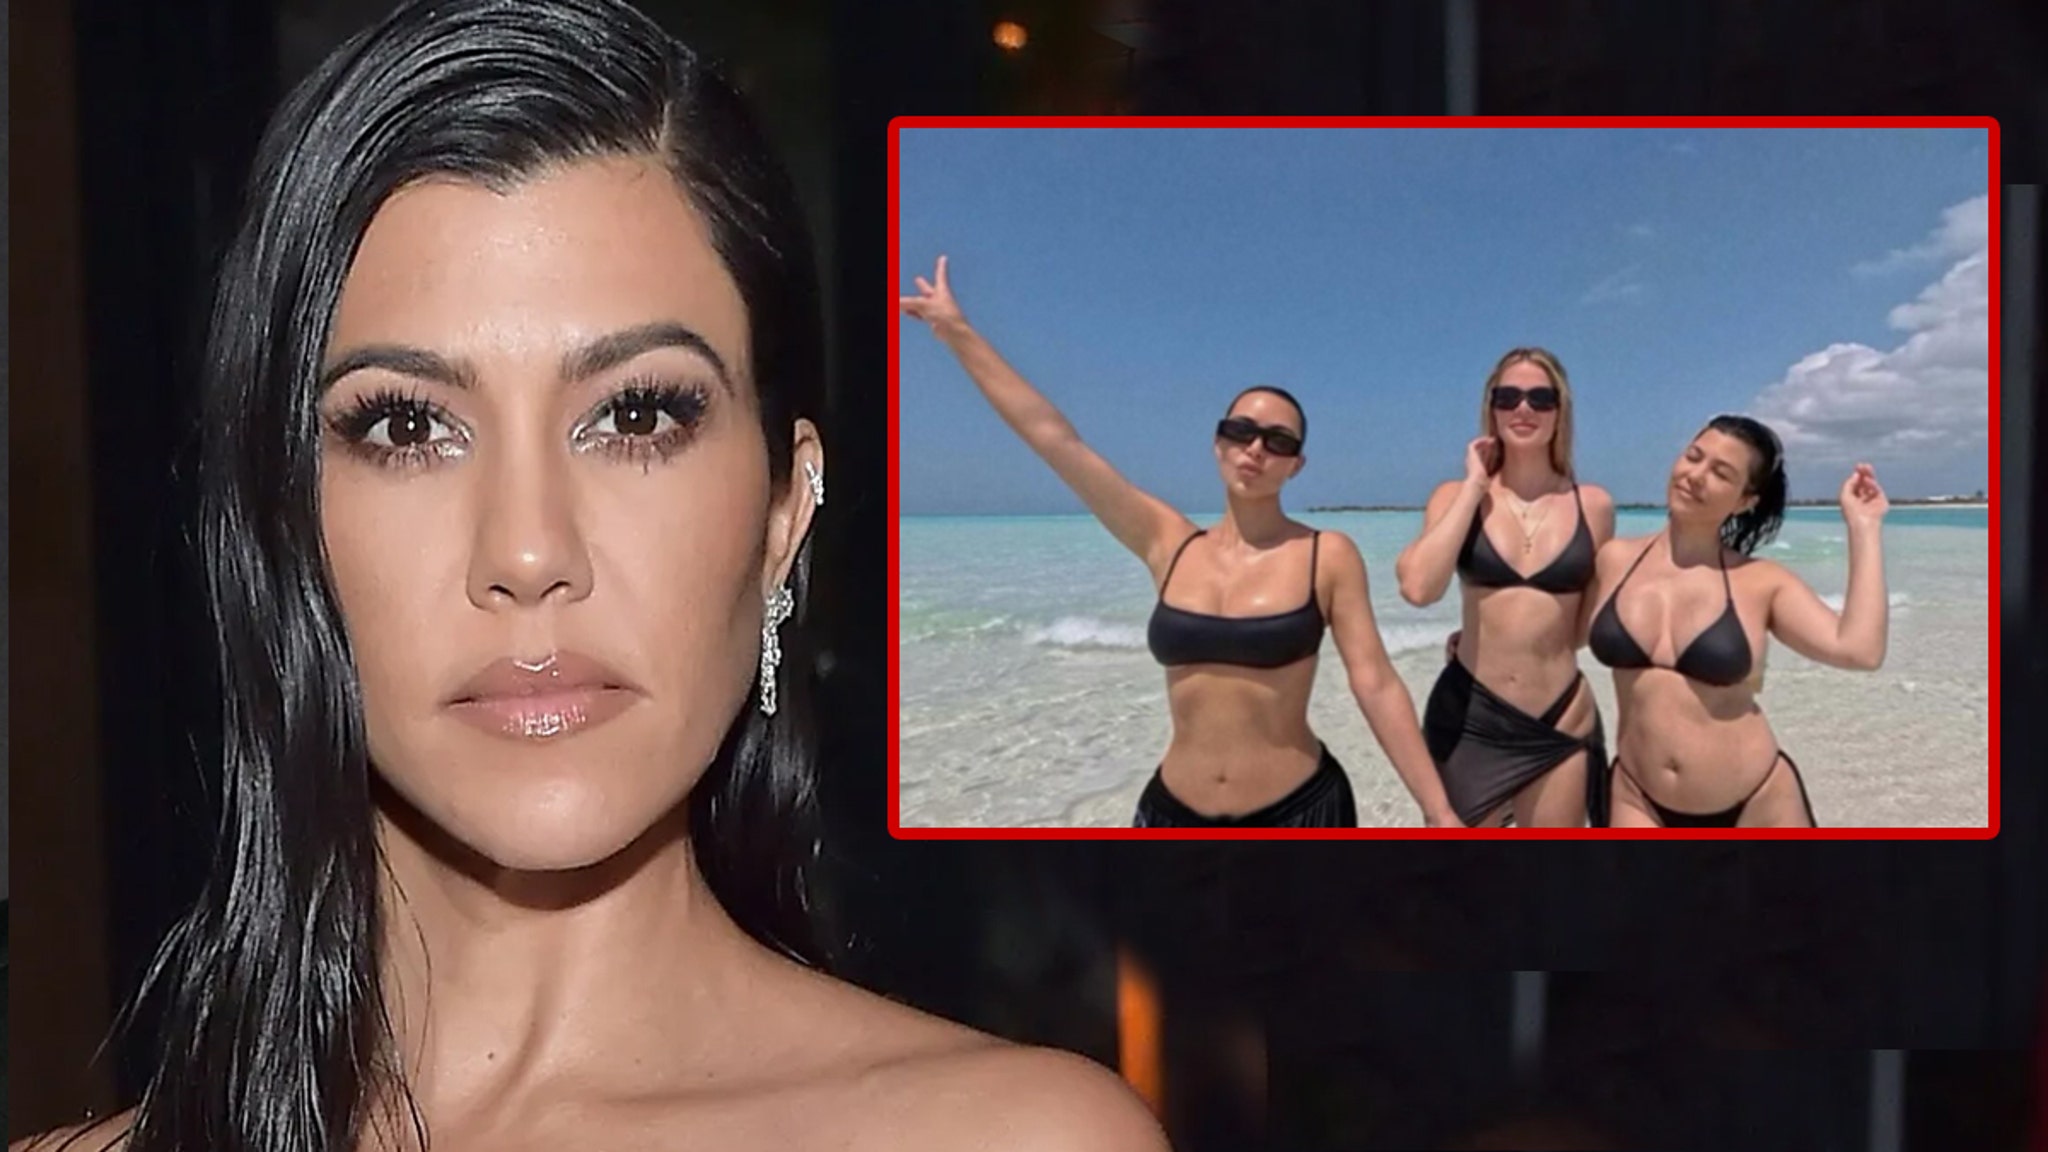 Kourtney Kardashian Celebrates 45th Birthday by Standing up for Her Post-Baby Body Against Online Criticism